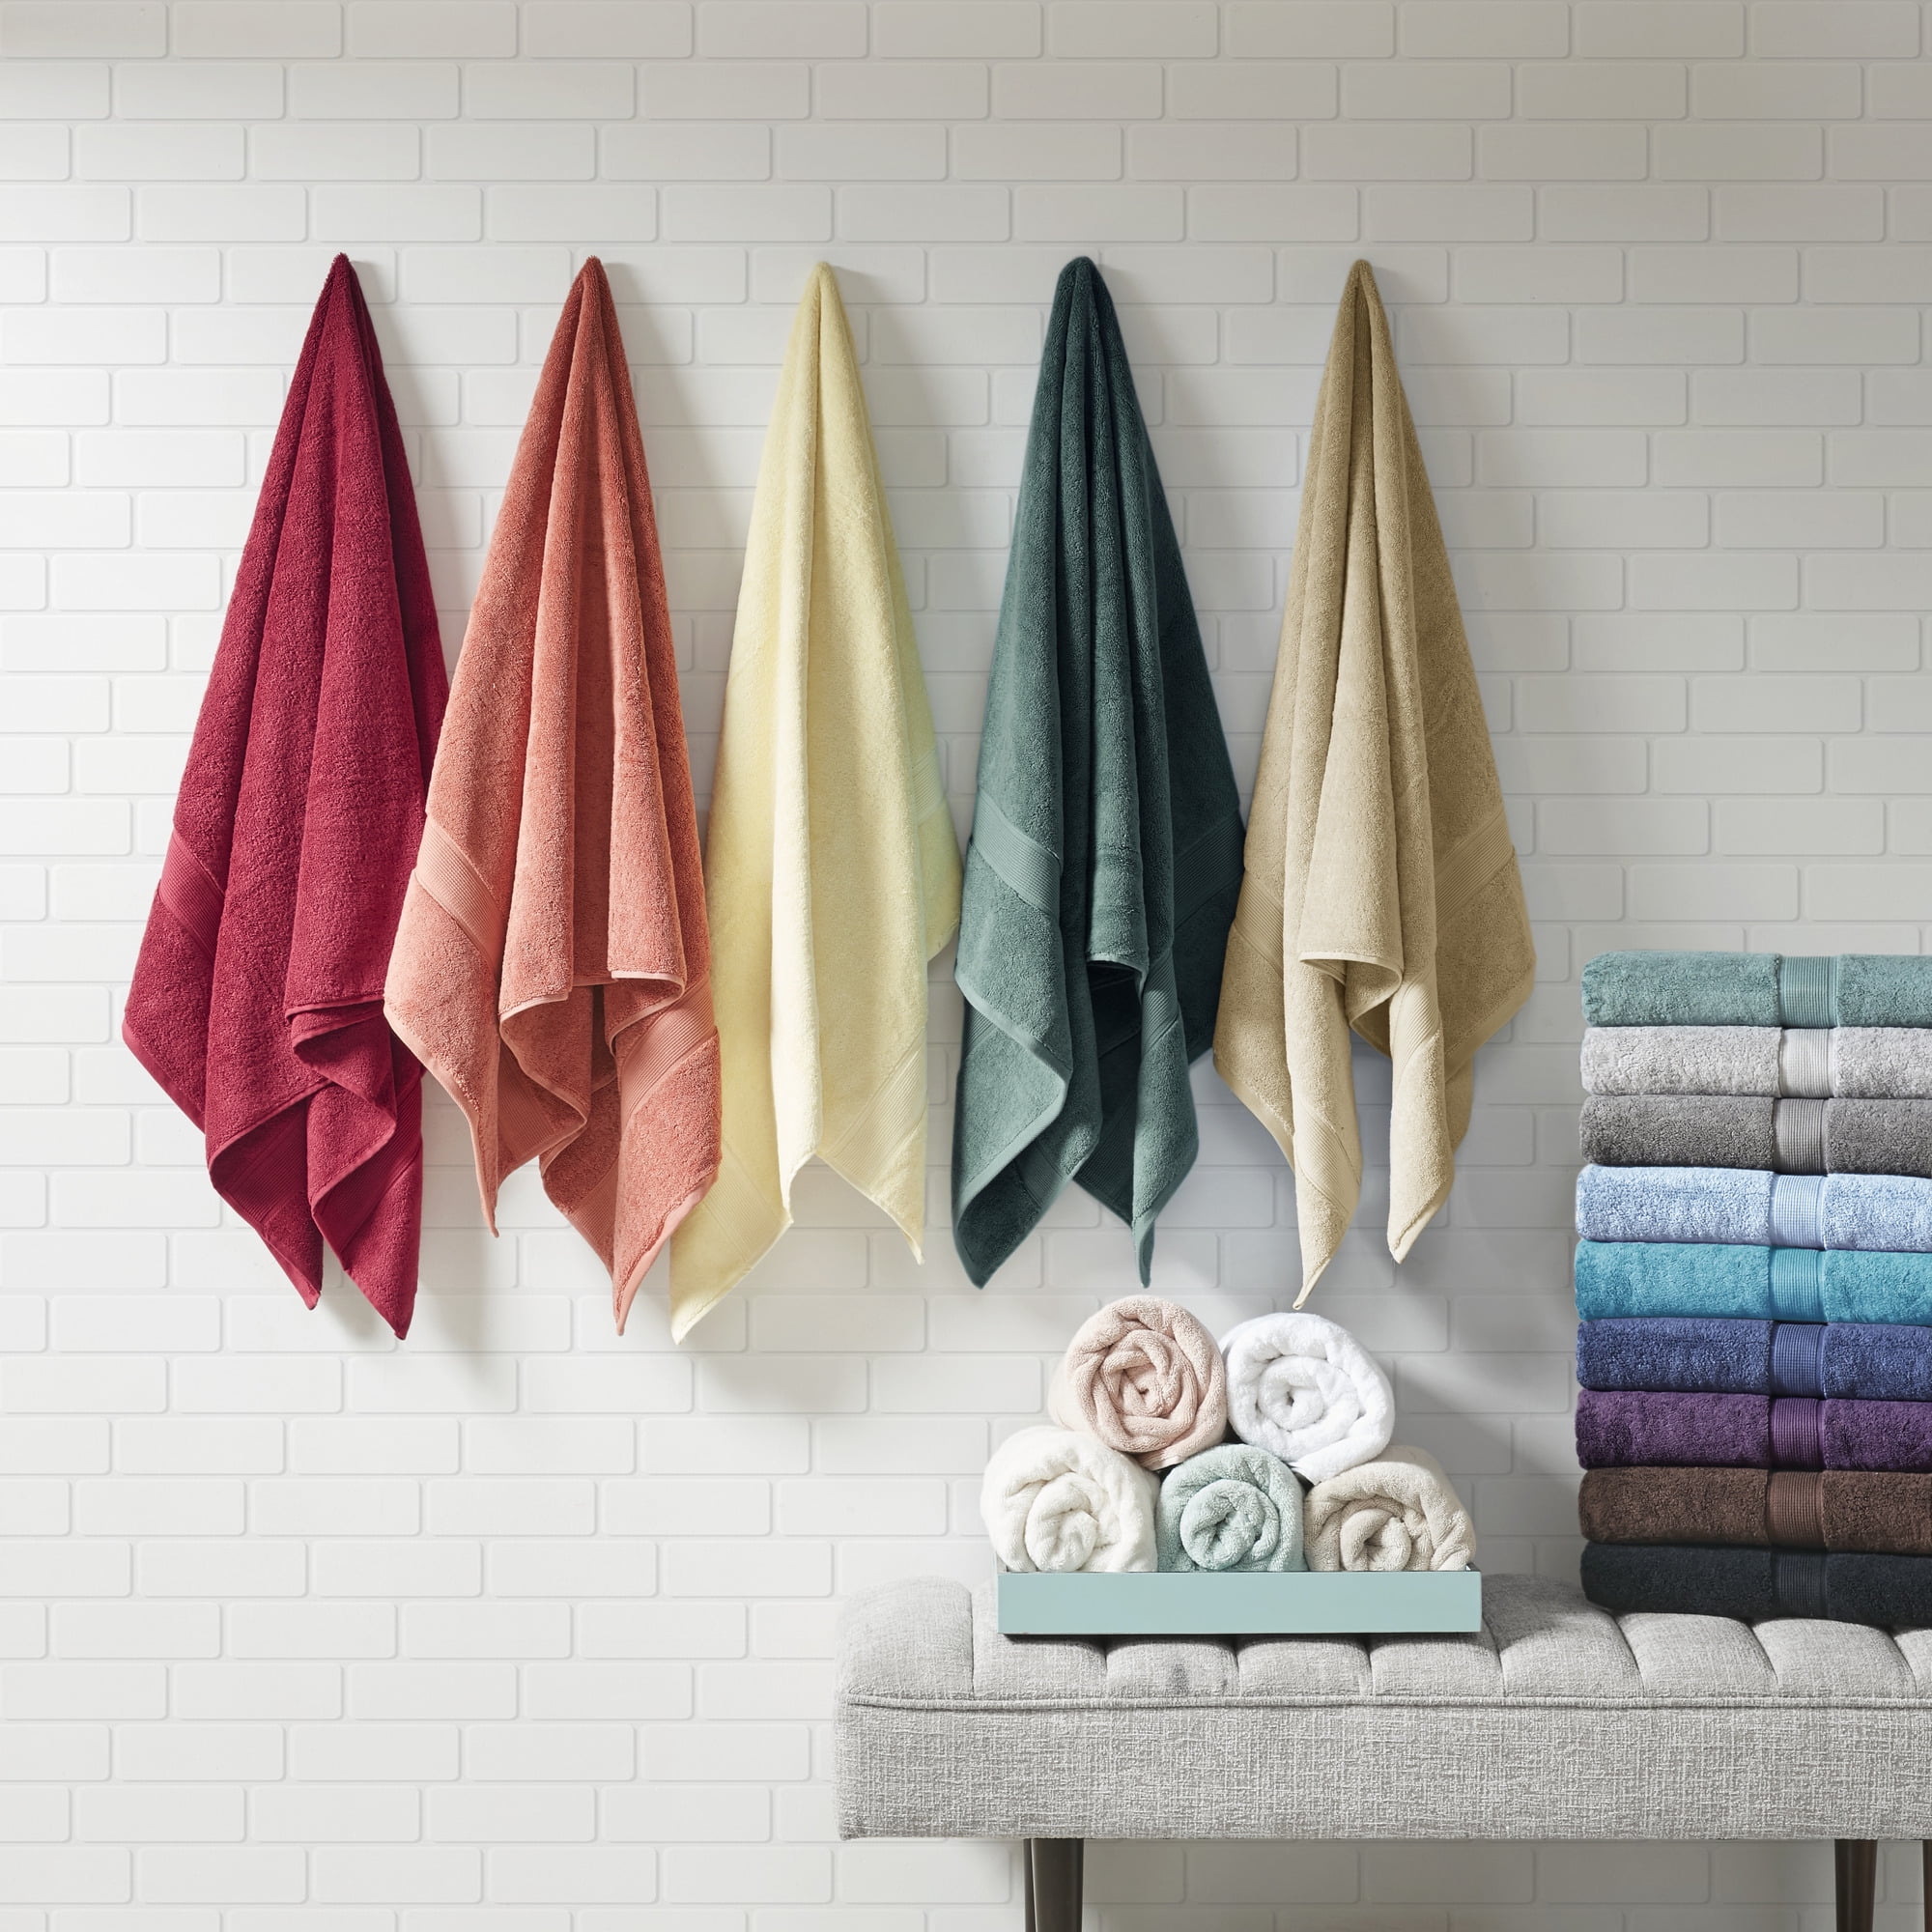 Purchase Delicious bath towel 800 gsm For Amazing Meals 